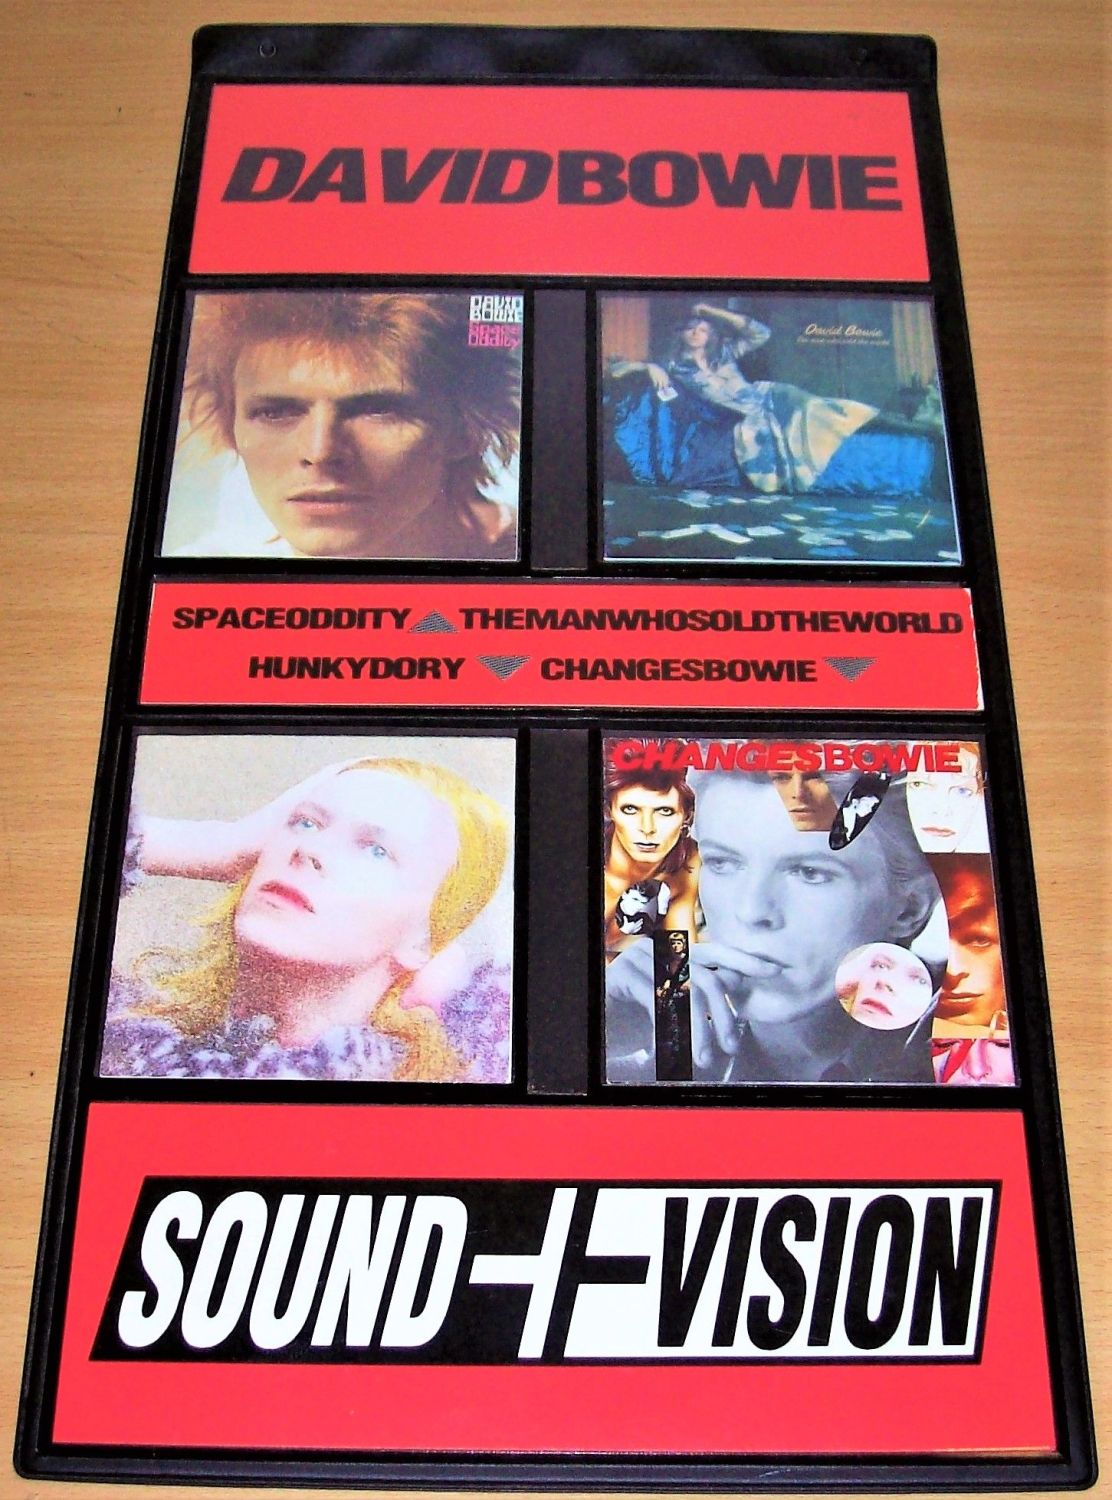 DAVID BOWIE UNUSED UK RECORD COMPANY PROMO SHOP DISPLAY 'SOUND AND VISION' 